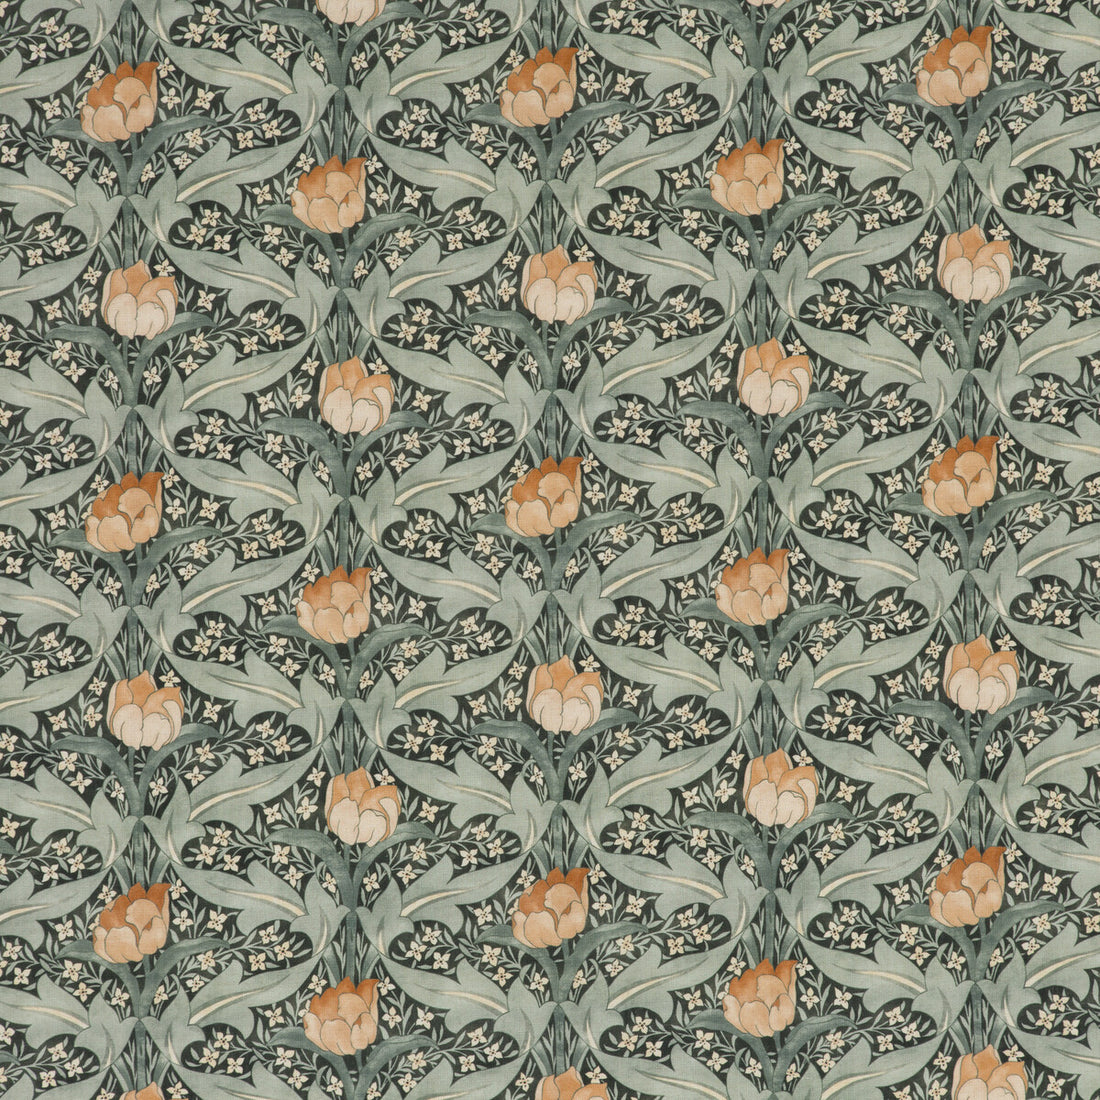 Tulip &amp; Jasmine fabric in teal color - pattern BP10622.3.0 - by G P &amp; J Baker in the Originals V collection